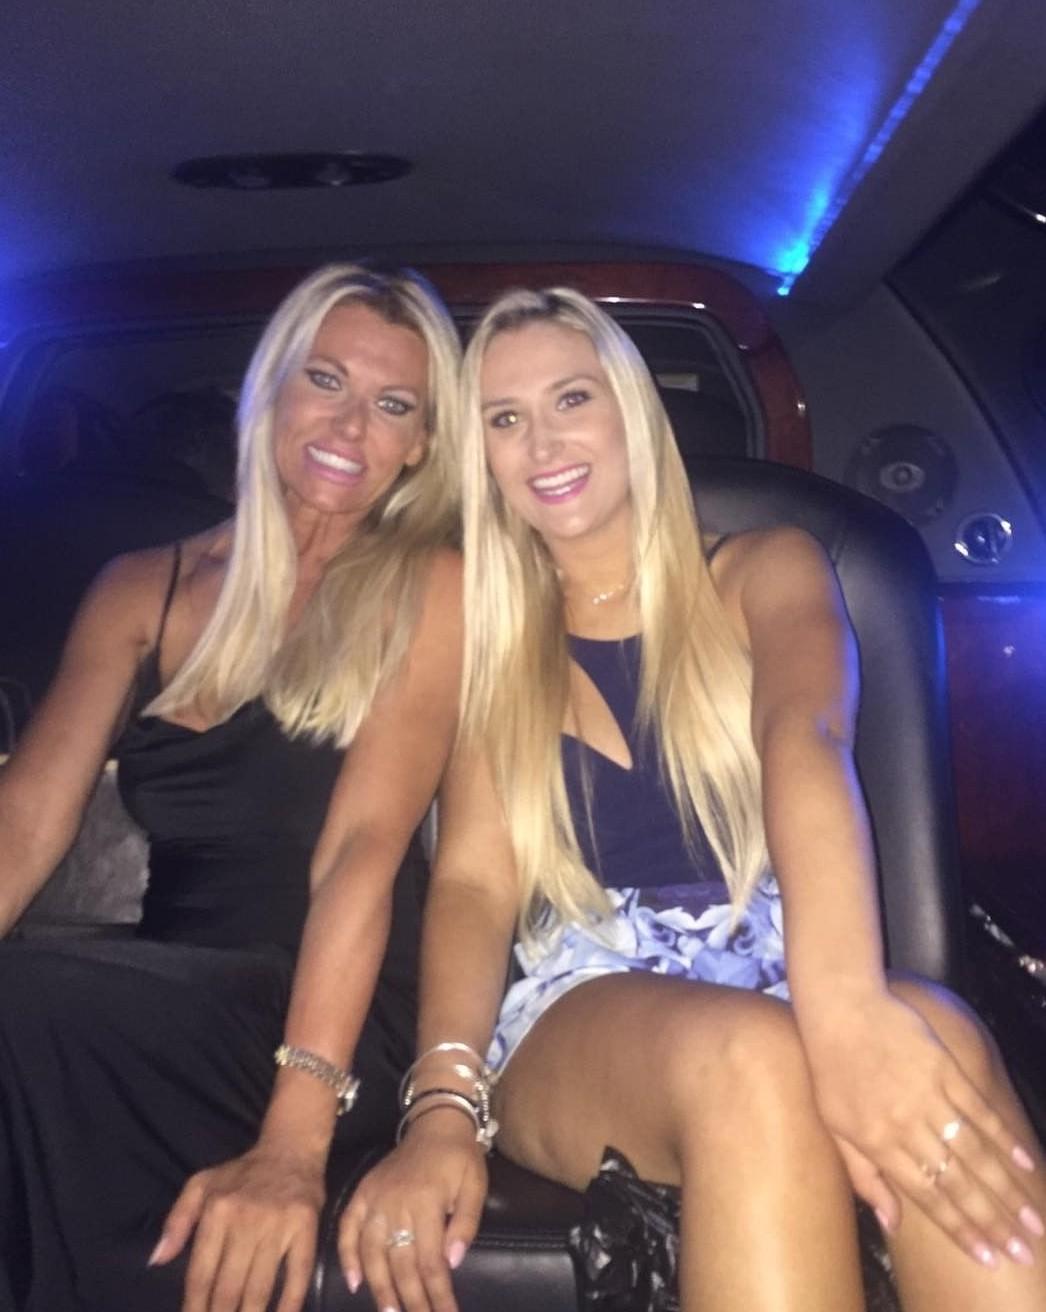 Limo ride with mom